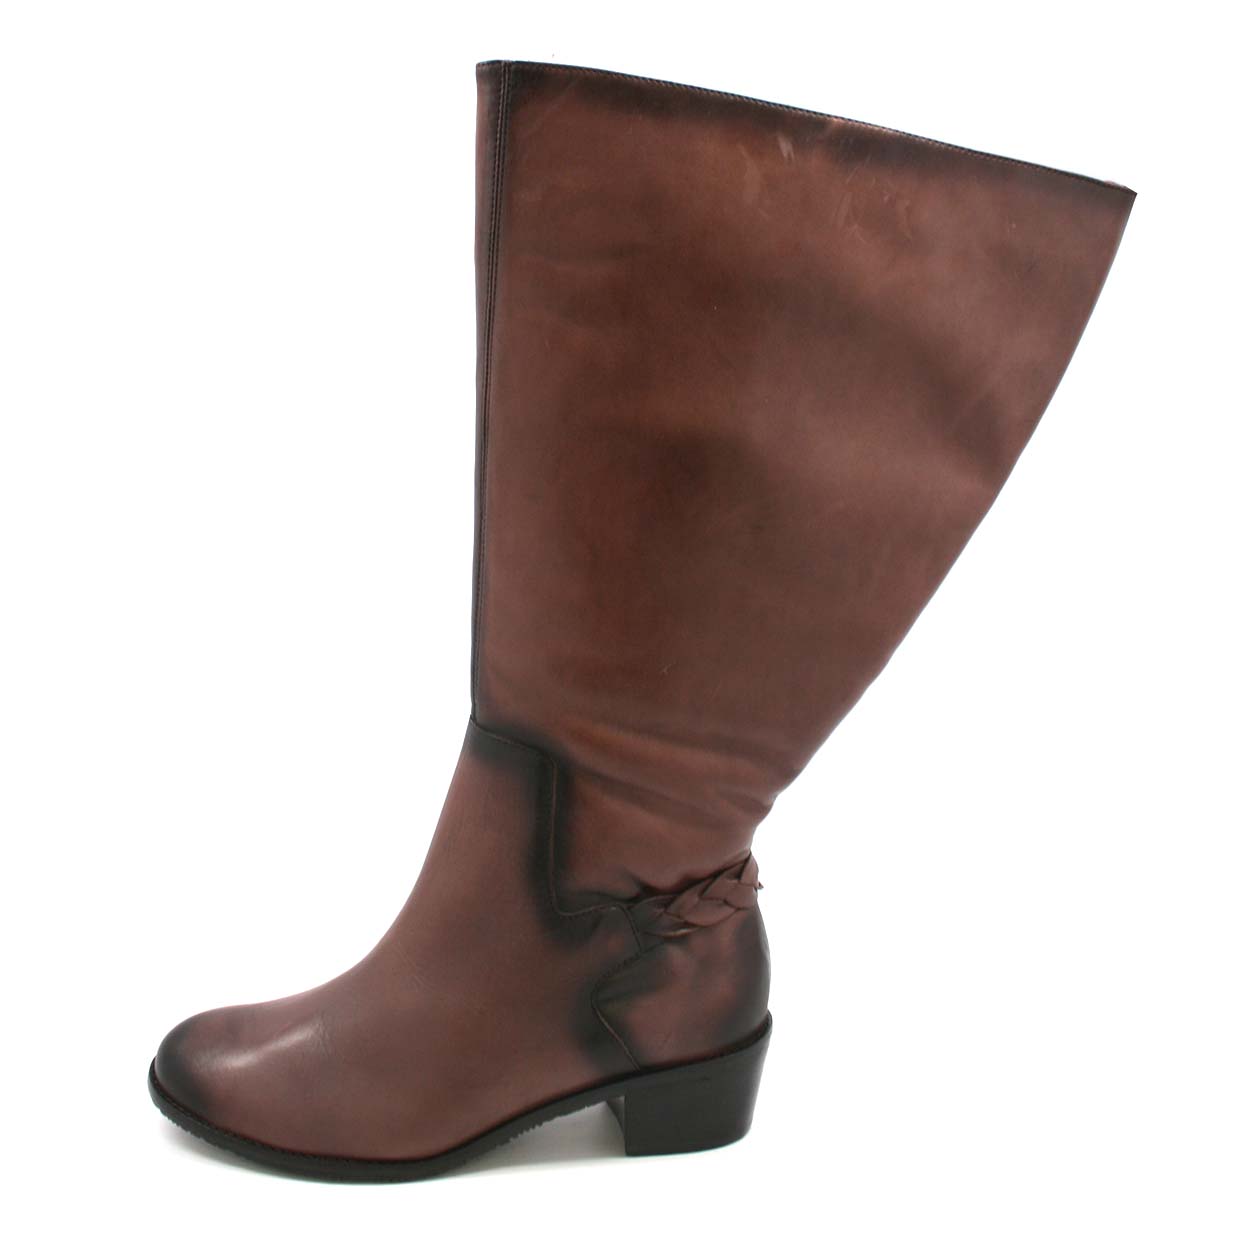 Rose Petals Curly Super Wide Calf Leather Riding Boot Tobacco - $202.30 : Slim and Skinny Calf ...